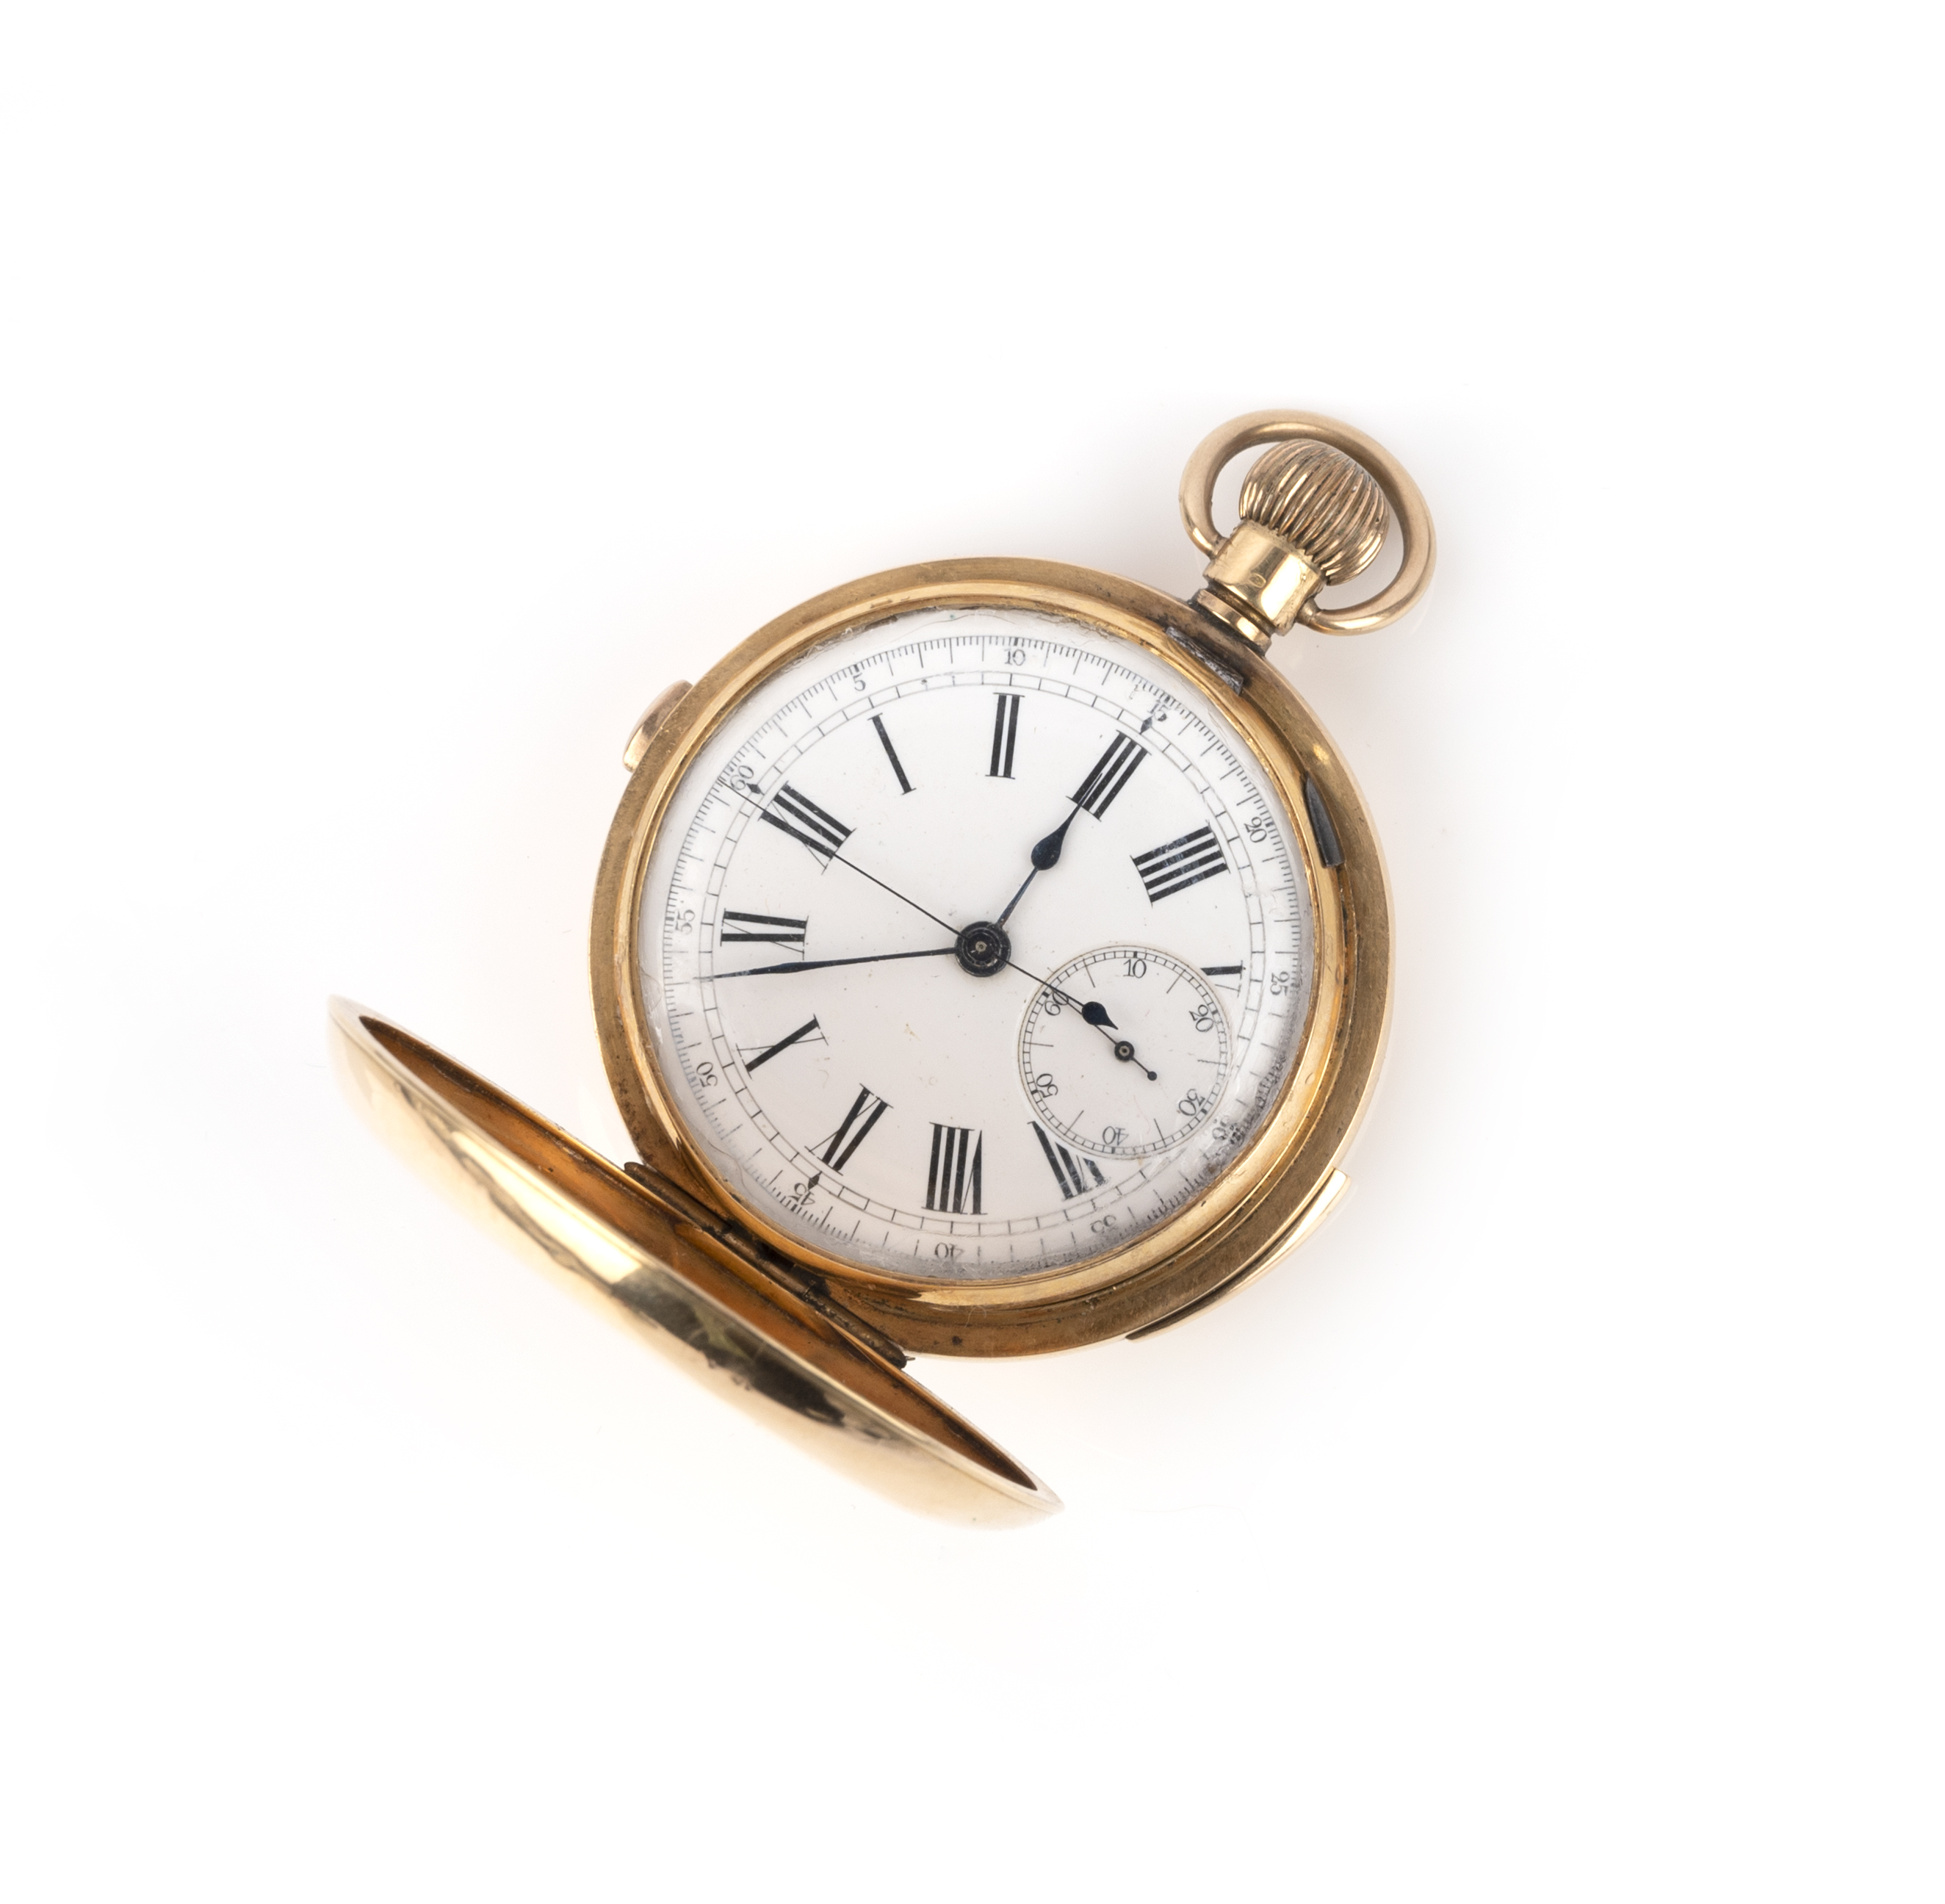 An 18ct gold repeater pocket watch, early 20th century, the white enamelled dial with black Roman